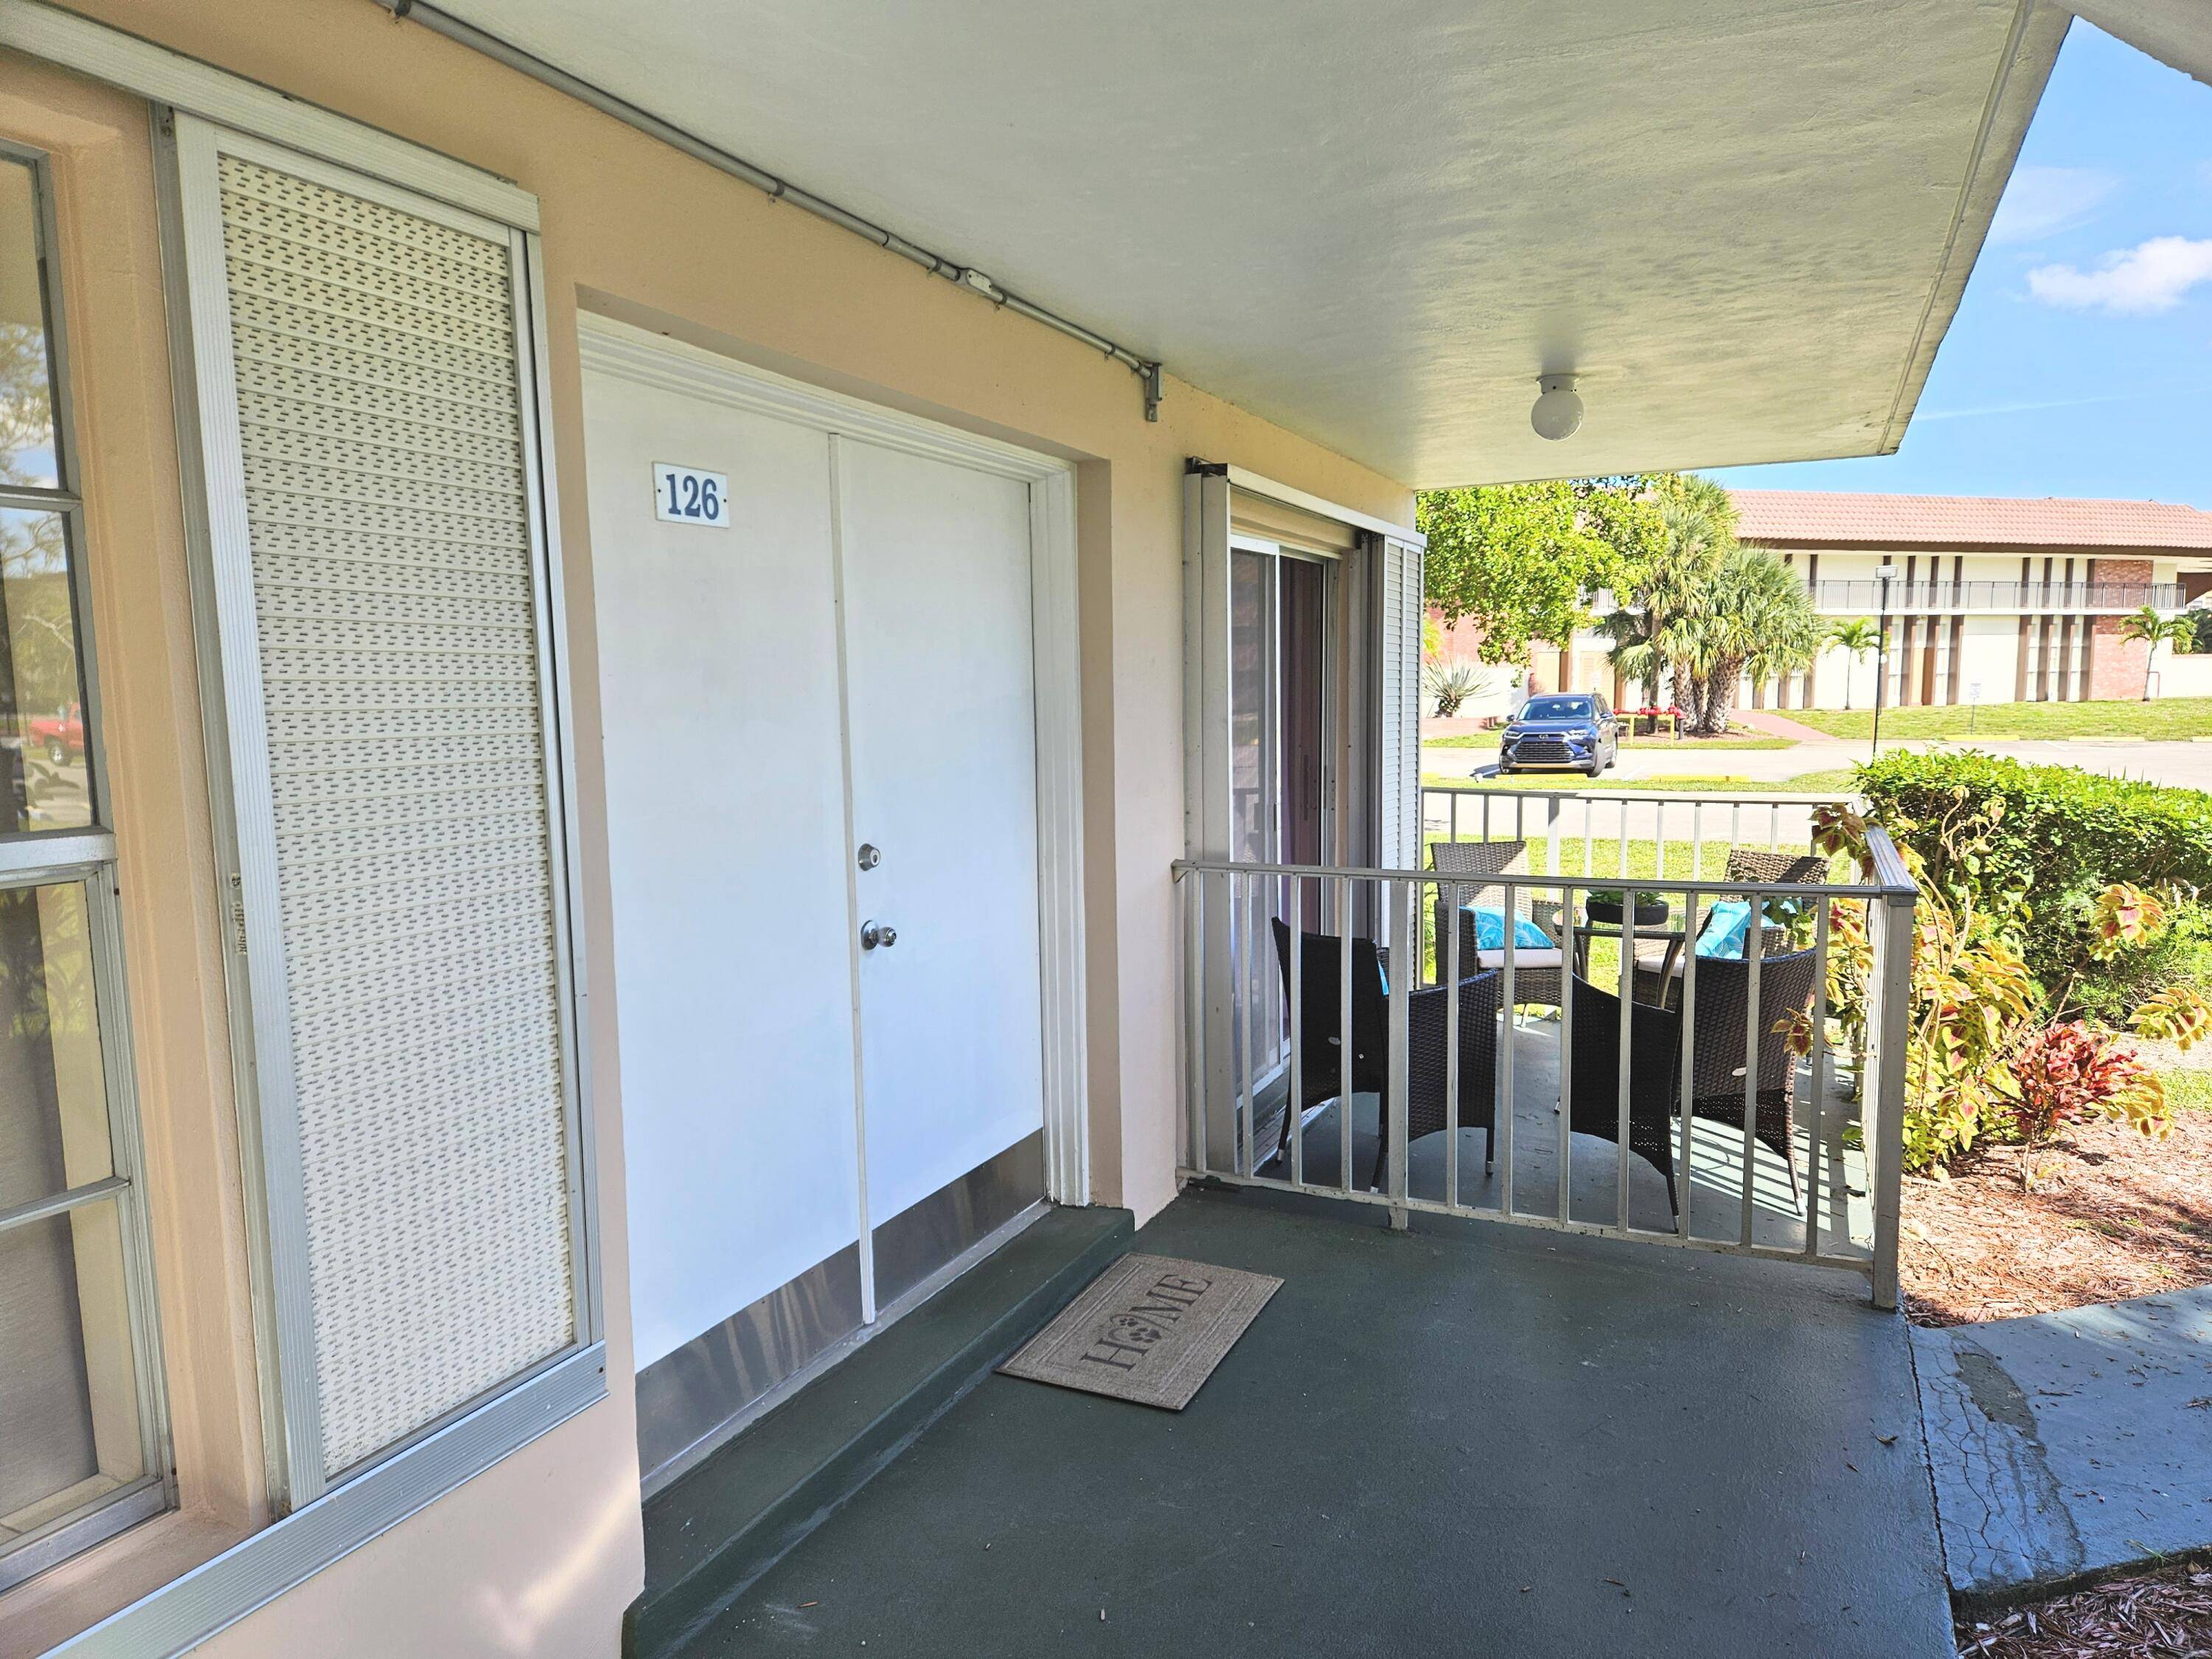 First Floor 2 2 well maintained corner unit condo with outdoor space and Florida room in the 55 active community of Lauderdale Oaks.